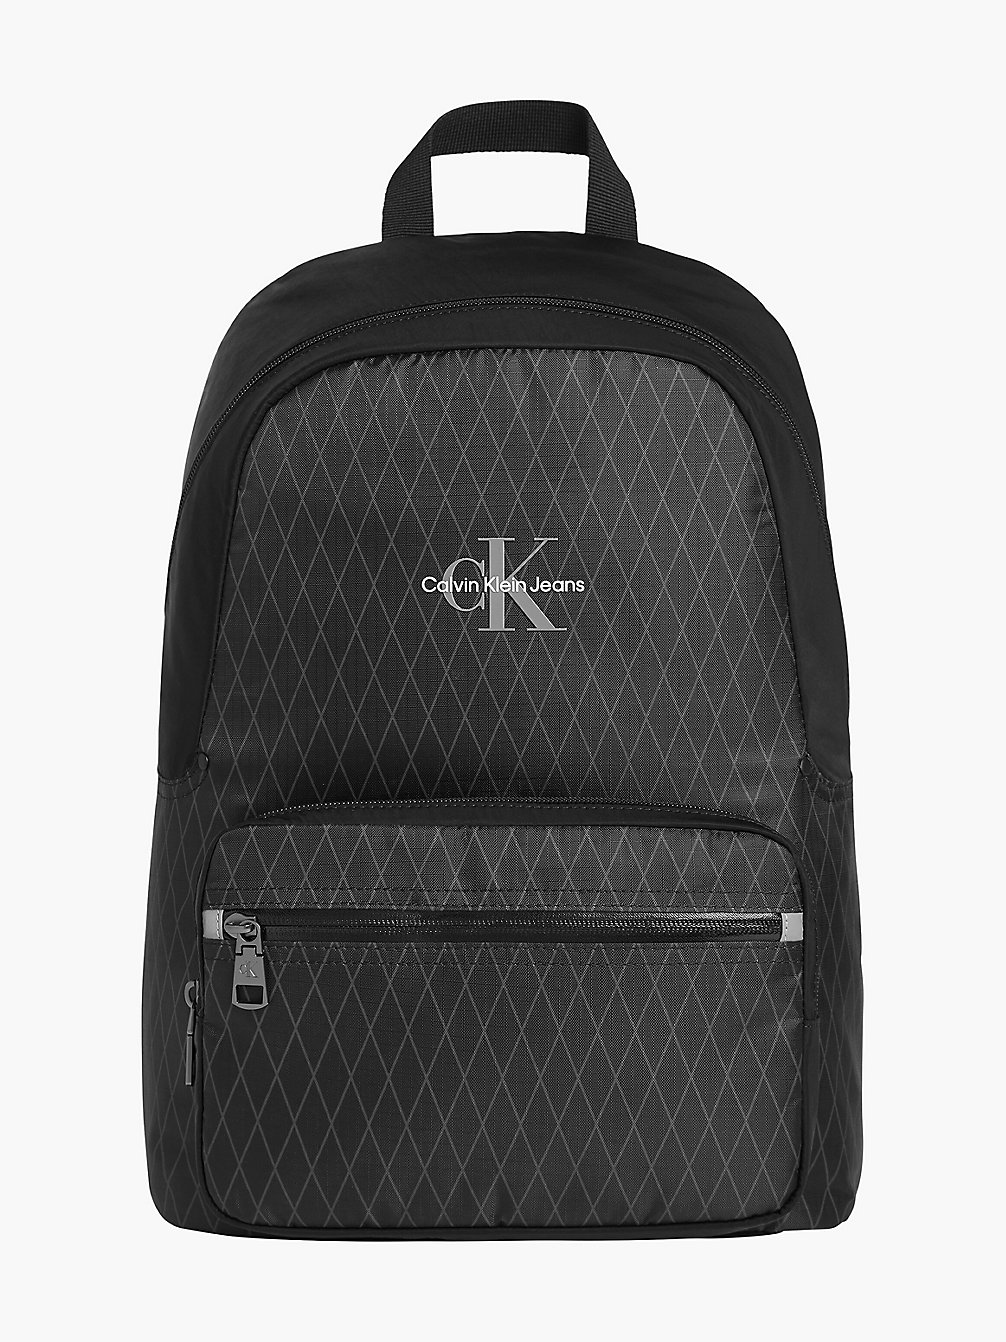 BLACK Recycled Nylon Round Backpack undefined men Calvin Klein